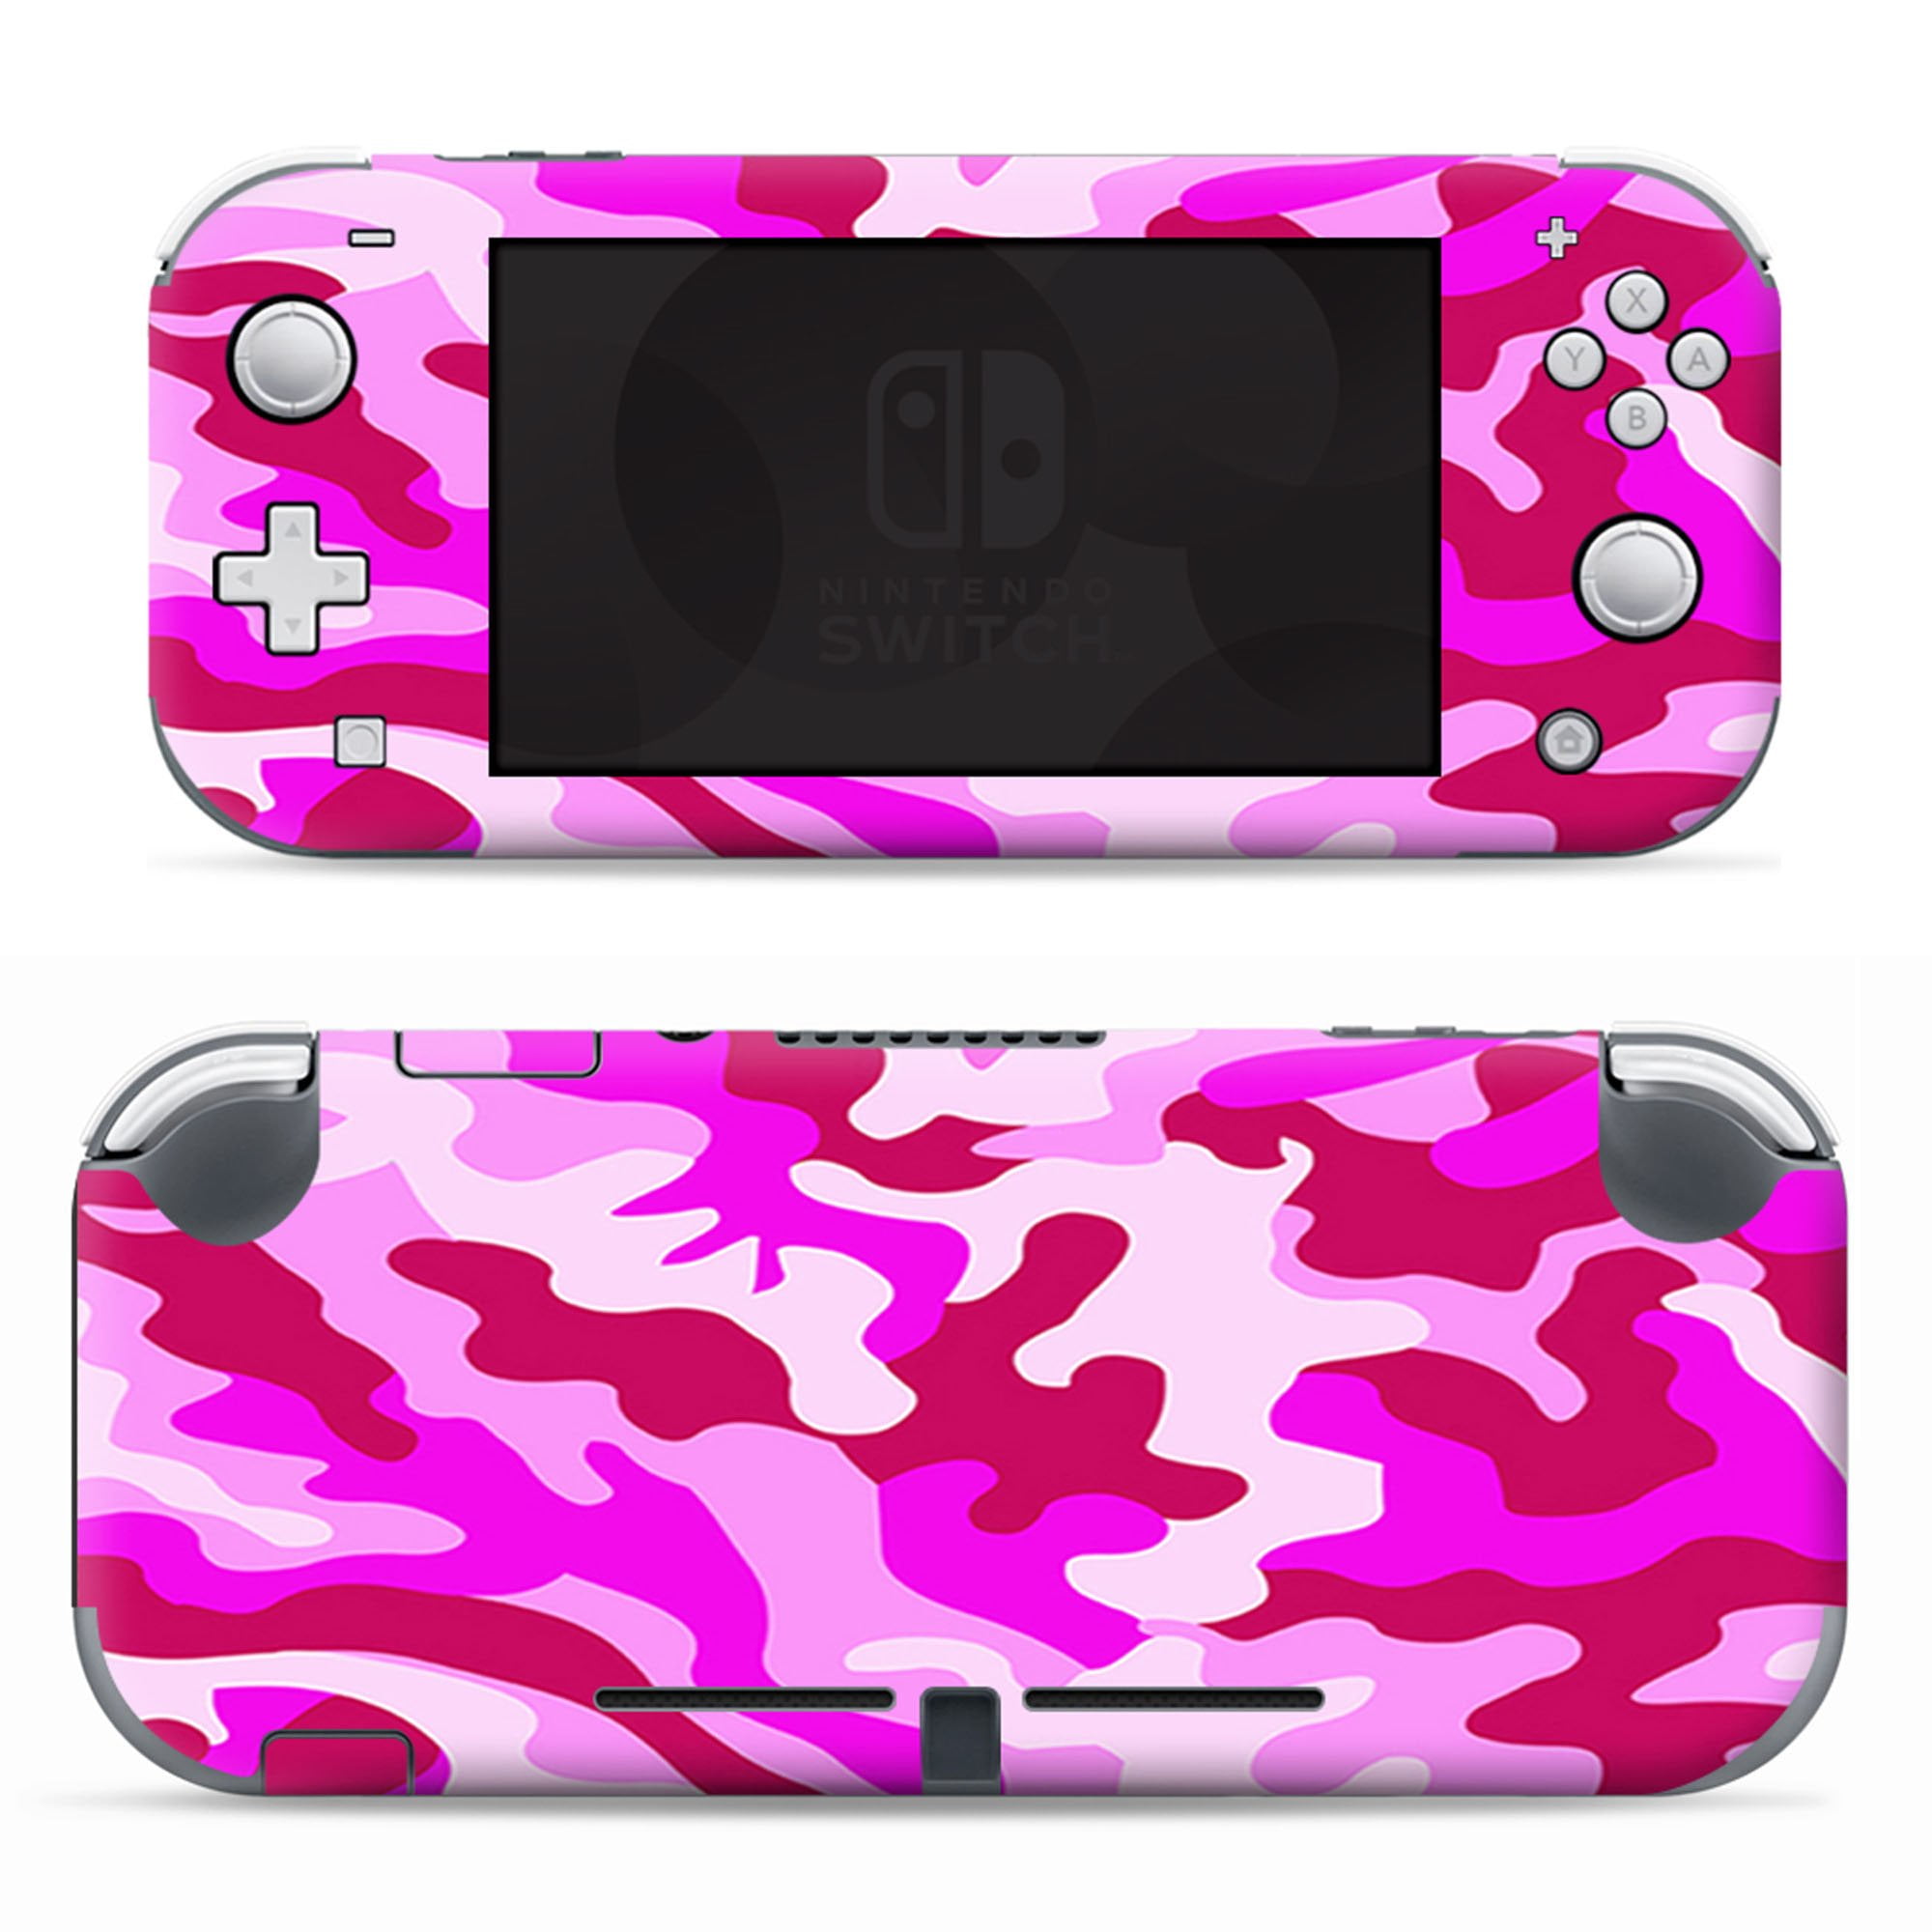 Nintendo Switch Lite Pink : Pink Clouds In The Sky Nintendo Switch Skin - StickyBunny / Learn about nintendo switch lite, part of the nintendo switch family of gaming systems.